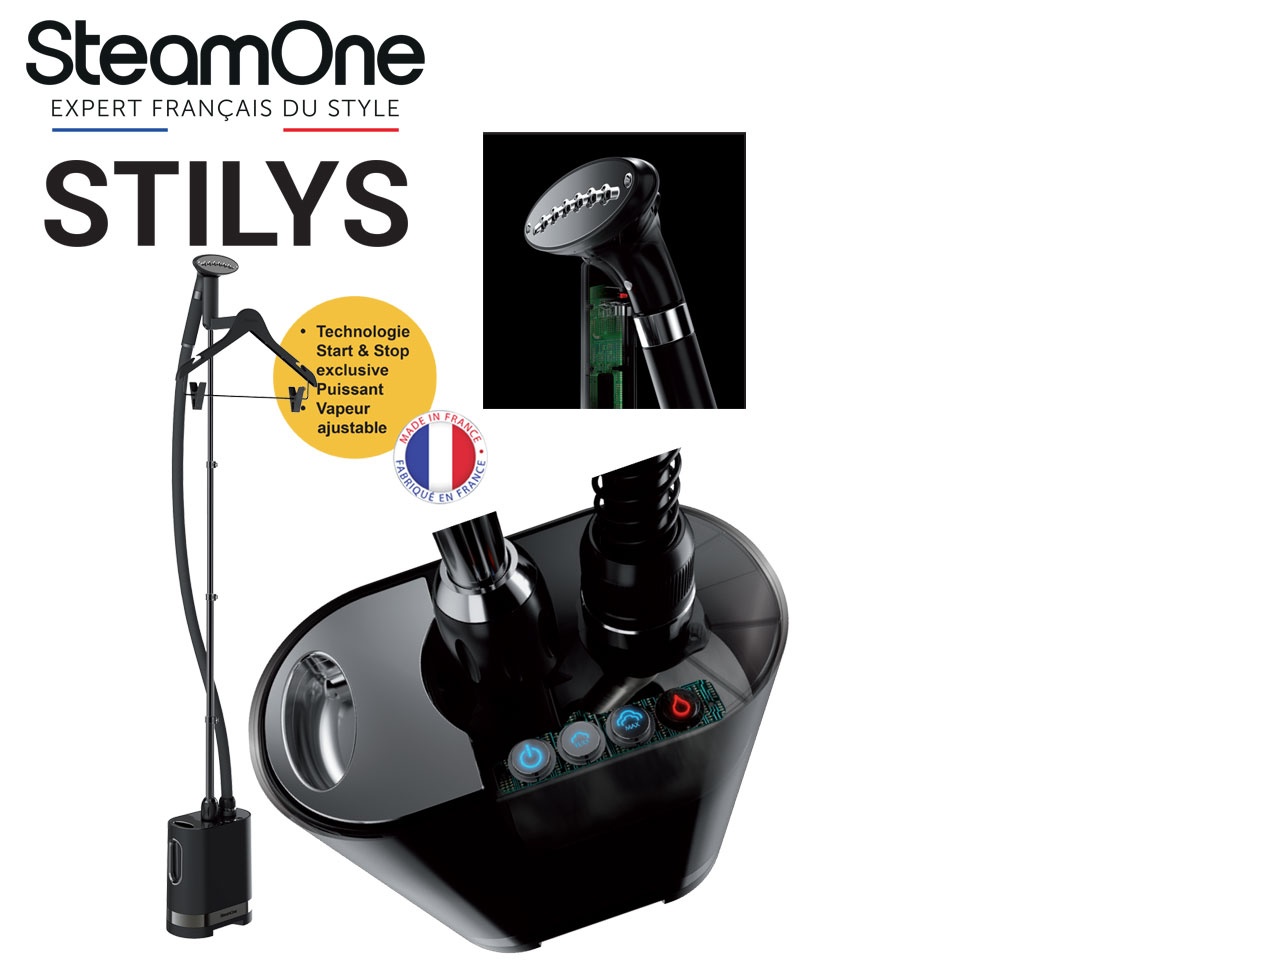 SteamOne arrive avec une innovation exclusive Made in France :STILYS  Start & Stop !